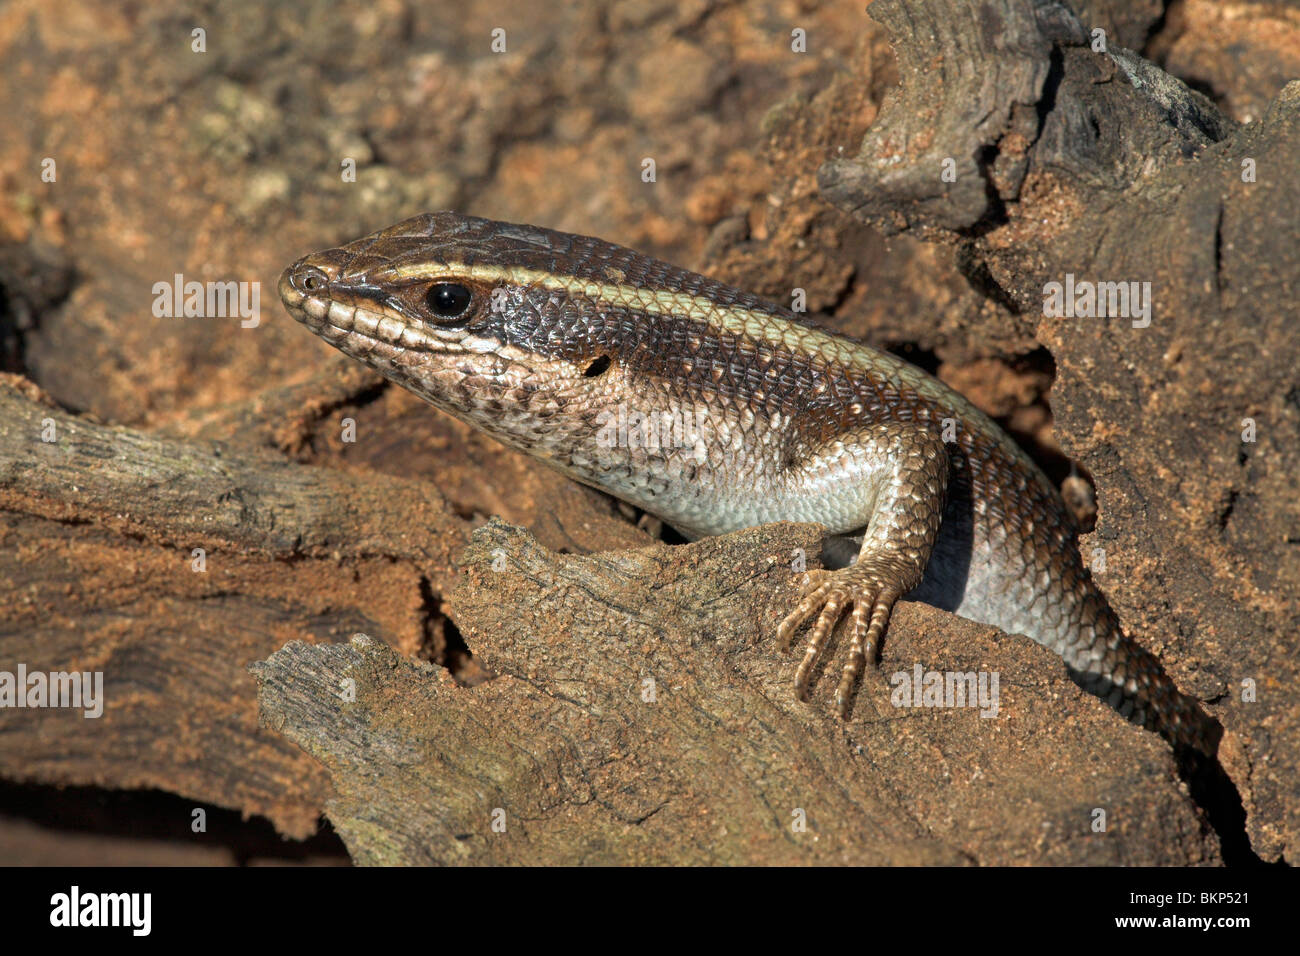 photo of a striped skink on a tree trunk Stock Photo